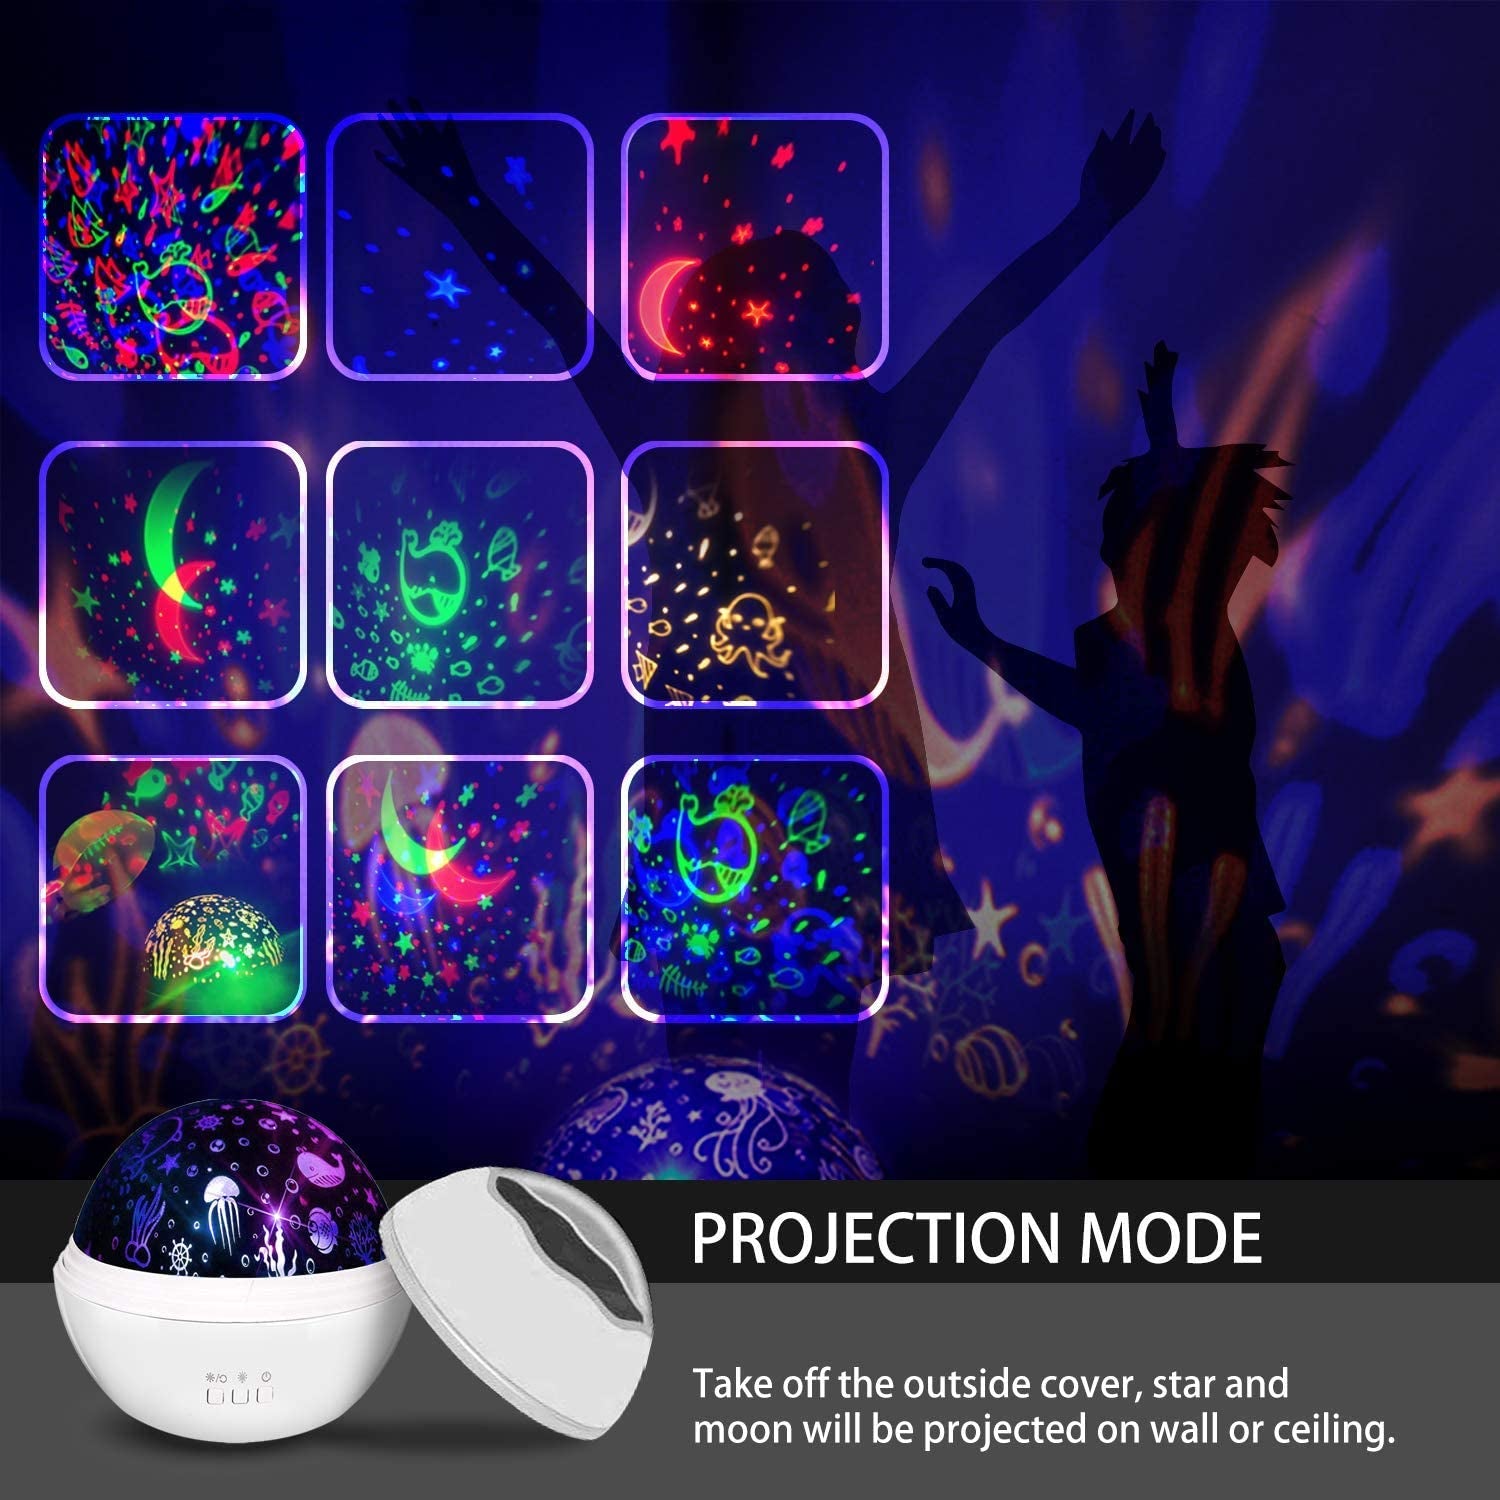 Moredig Baby Lights Projector, Star Projector Light with Starry Sky and Undersea Theme for Birthday, Parties - White